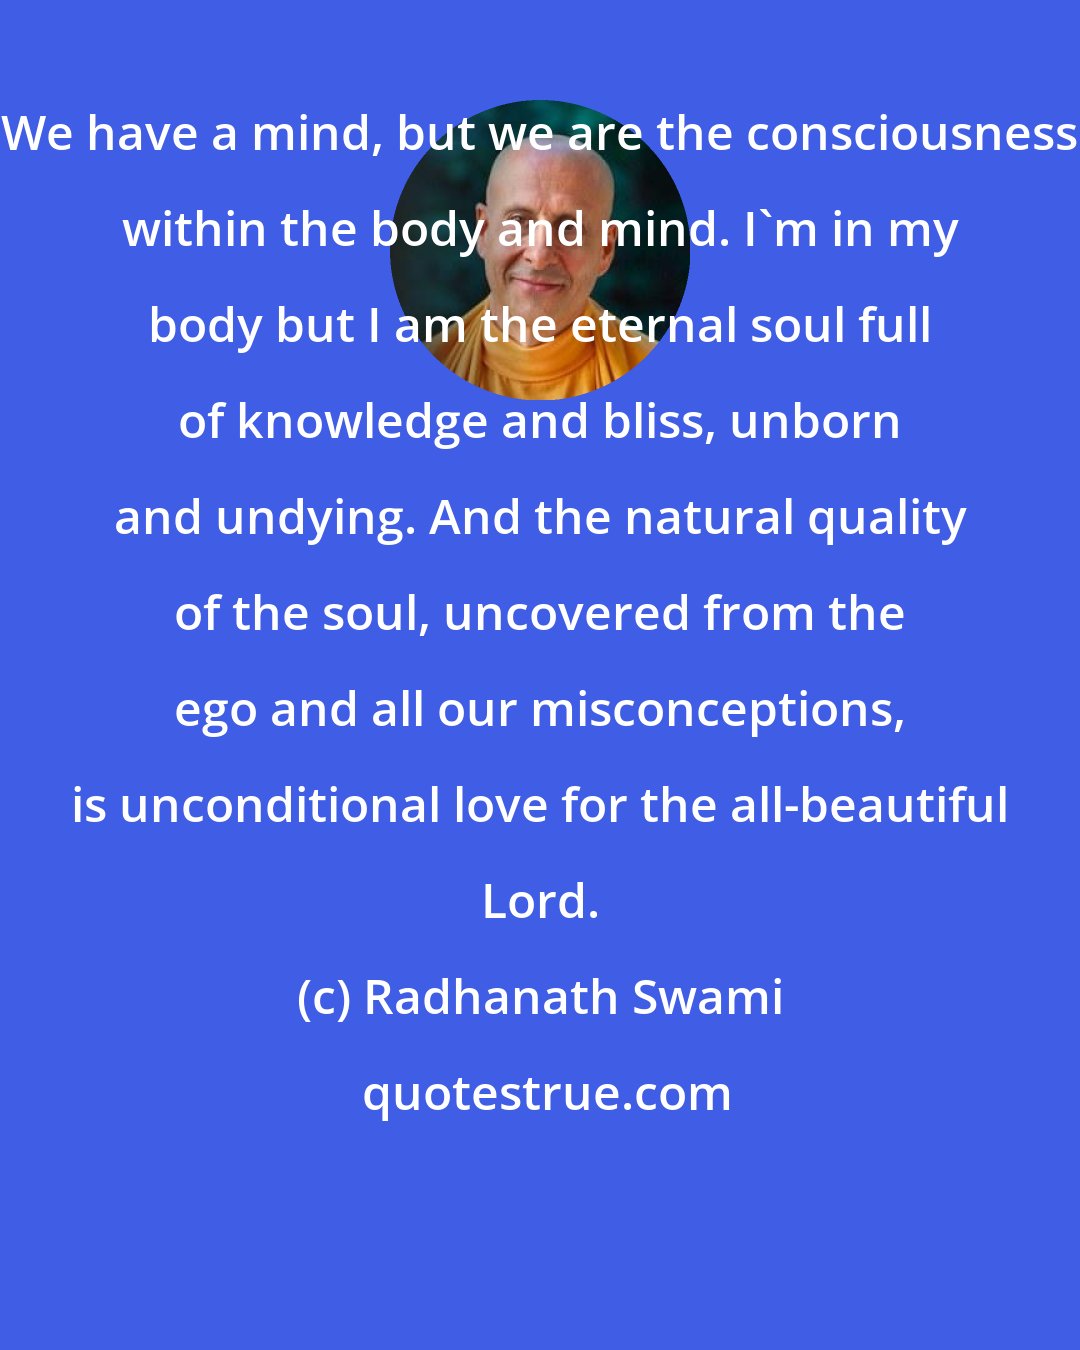 Radhanath Swami: We have a mind, but we are the consciousness within the body and mind. I'm in my body but I am the eternal soul full of knowledge and bliss, unborn and undying. And the natural quality of the soul, uncovered from the ego and all our misconceptions, is unconditional love for the all-beautiful Lord.